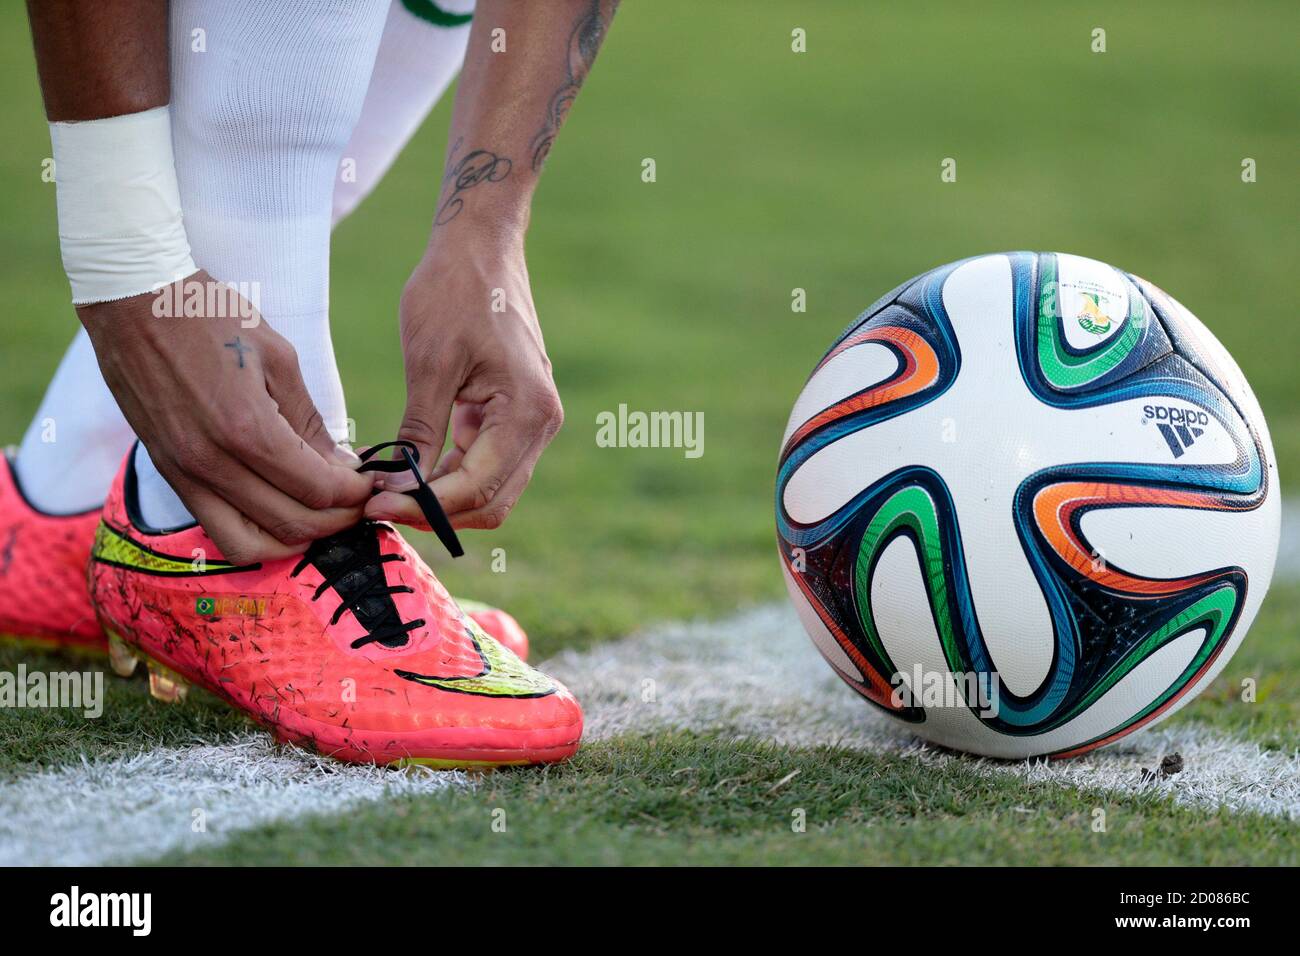 Neymar of Brazil adjusts his soccer shoes during an international friendly  soccer match against Panama ahead of the 2014 World Cup, in Goiania June 3,  2014. Picture taken June 3, 2014. REUTERS/Ueslei